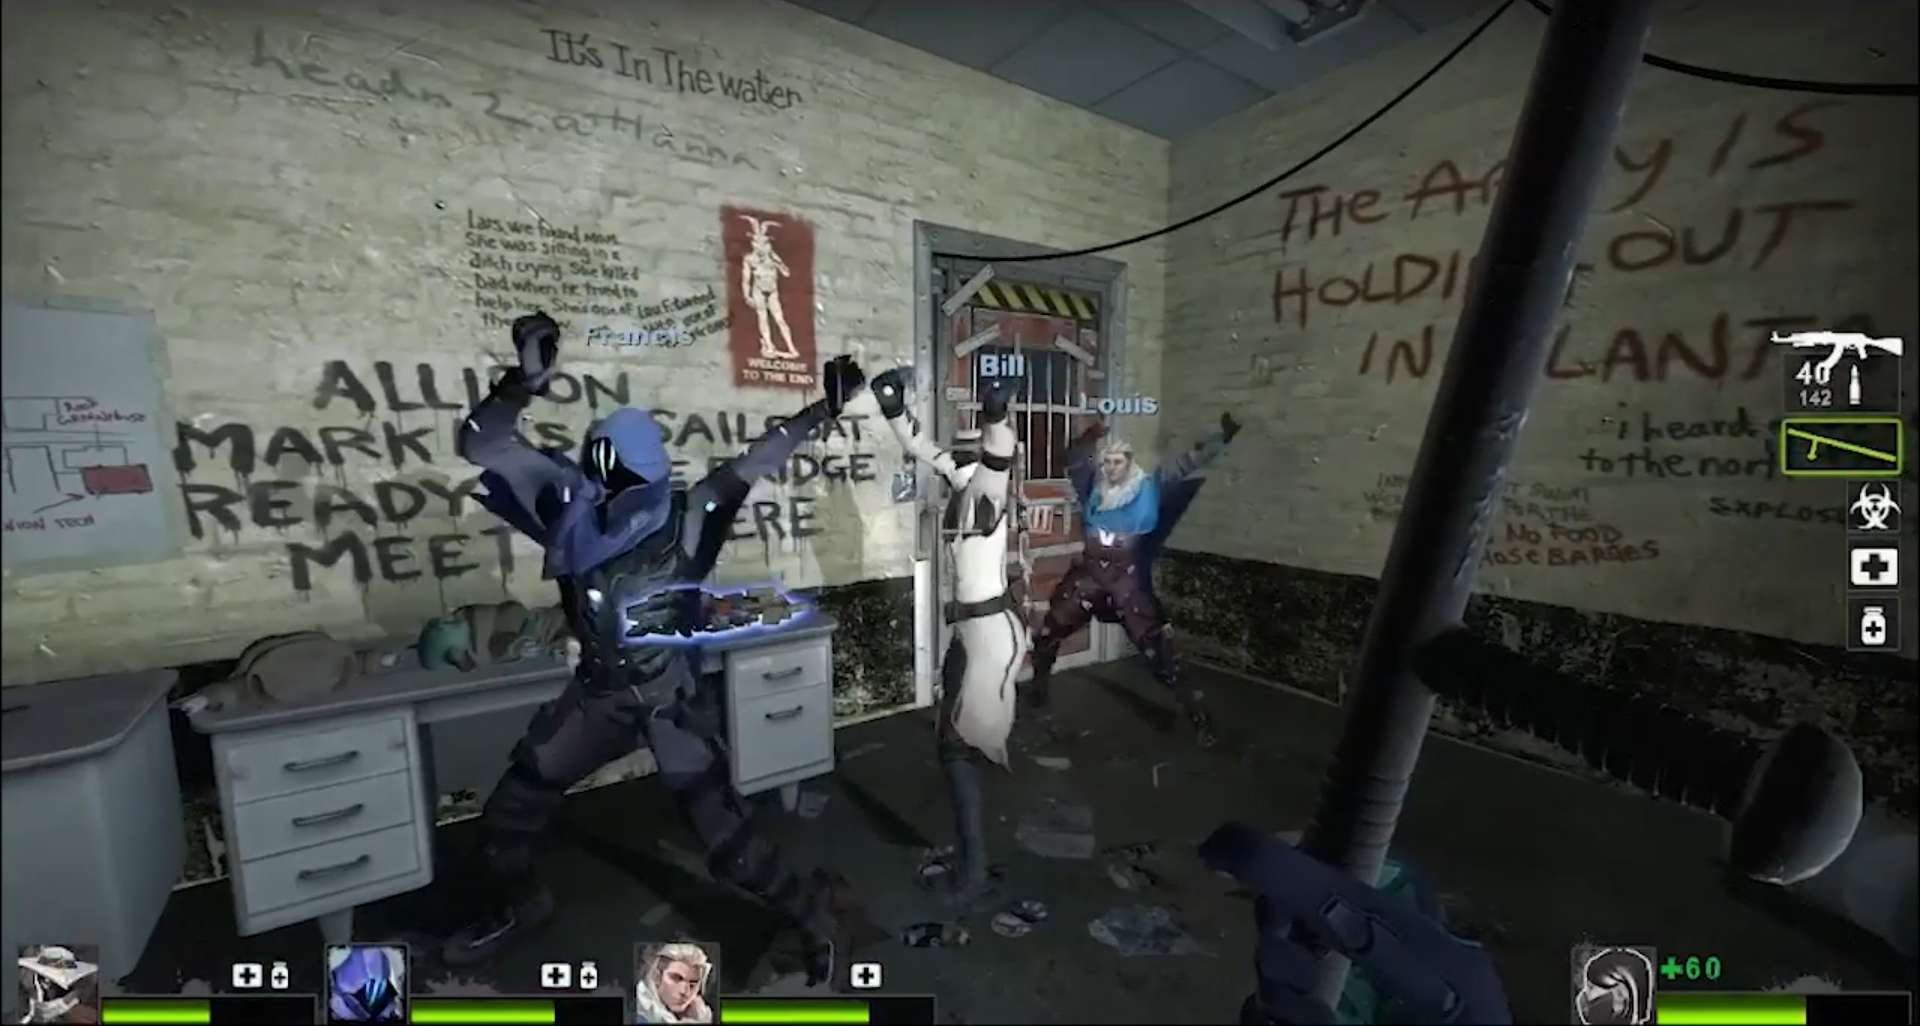 Way "eat blood like celebrate" of the Valorant Agents in the L4D2 game.